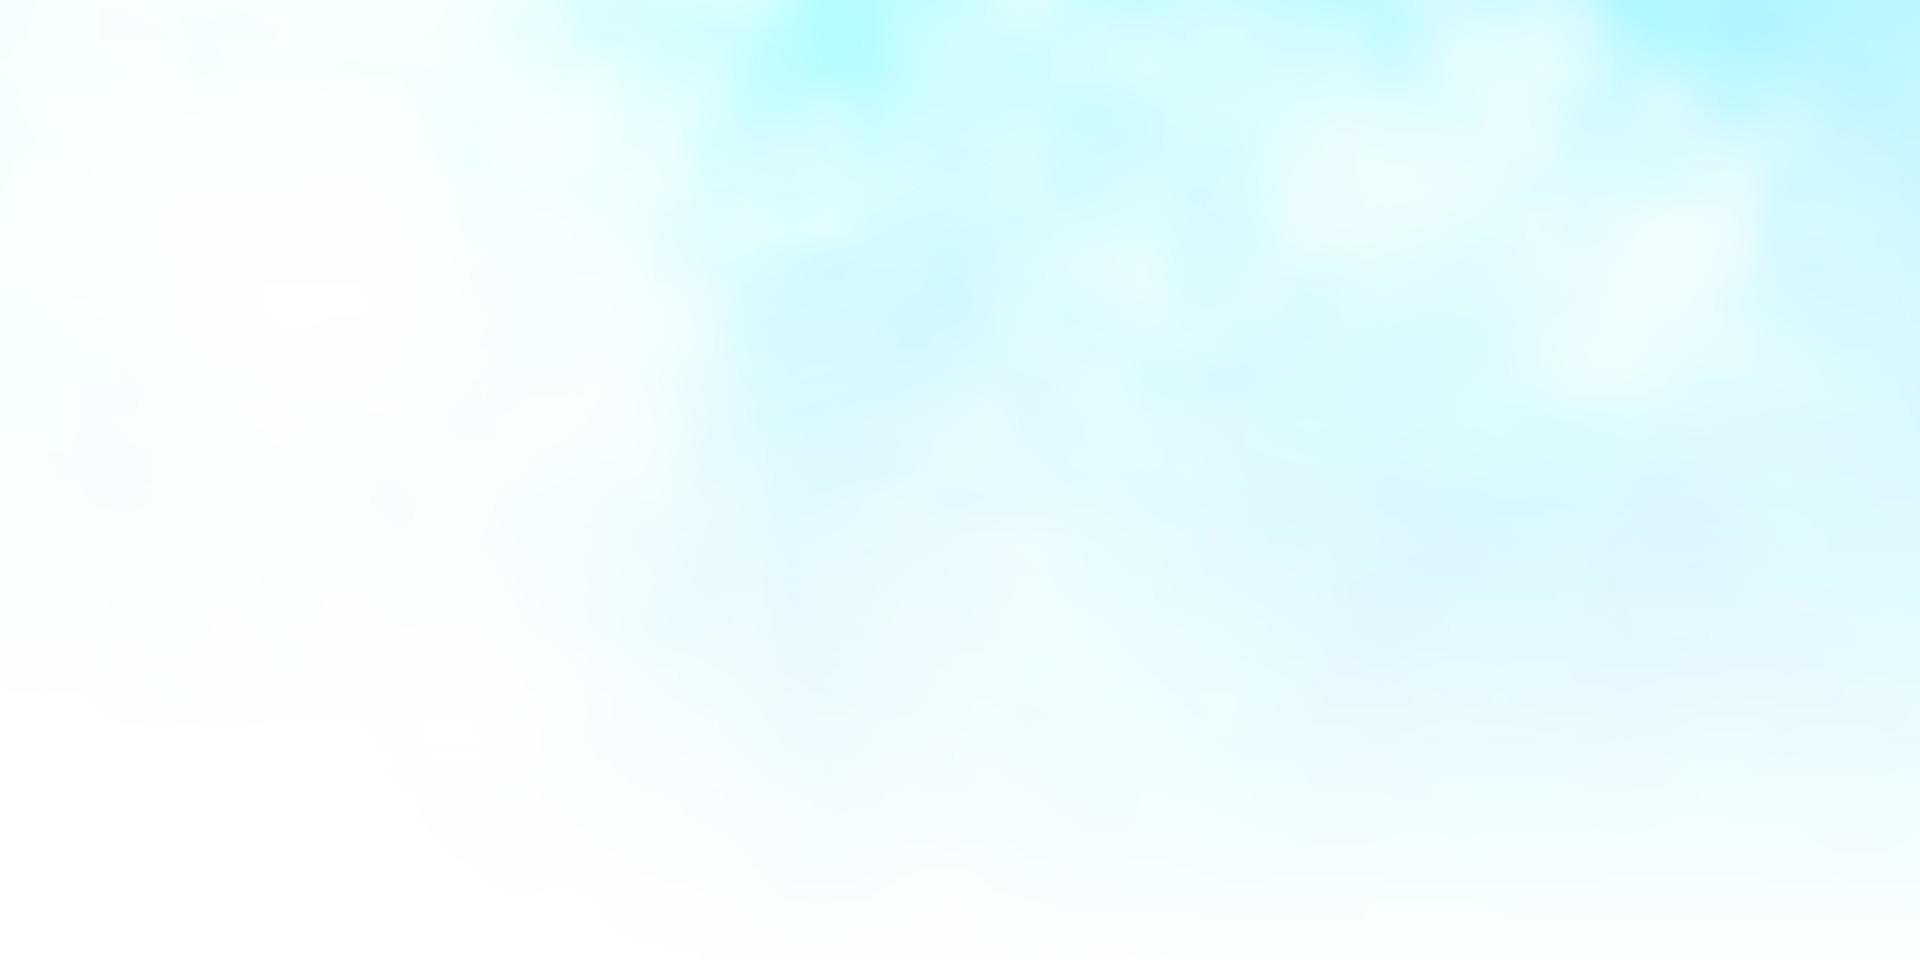 Light BLUE vector background with clouds.